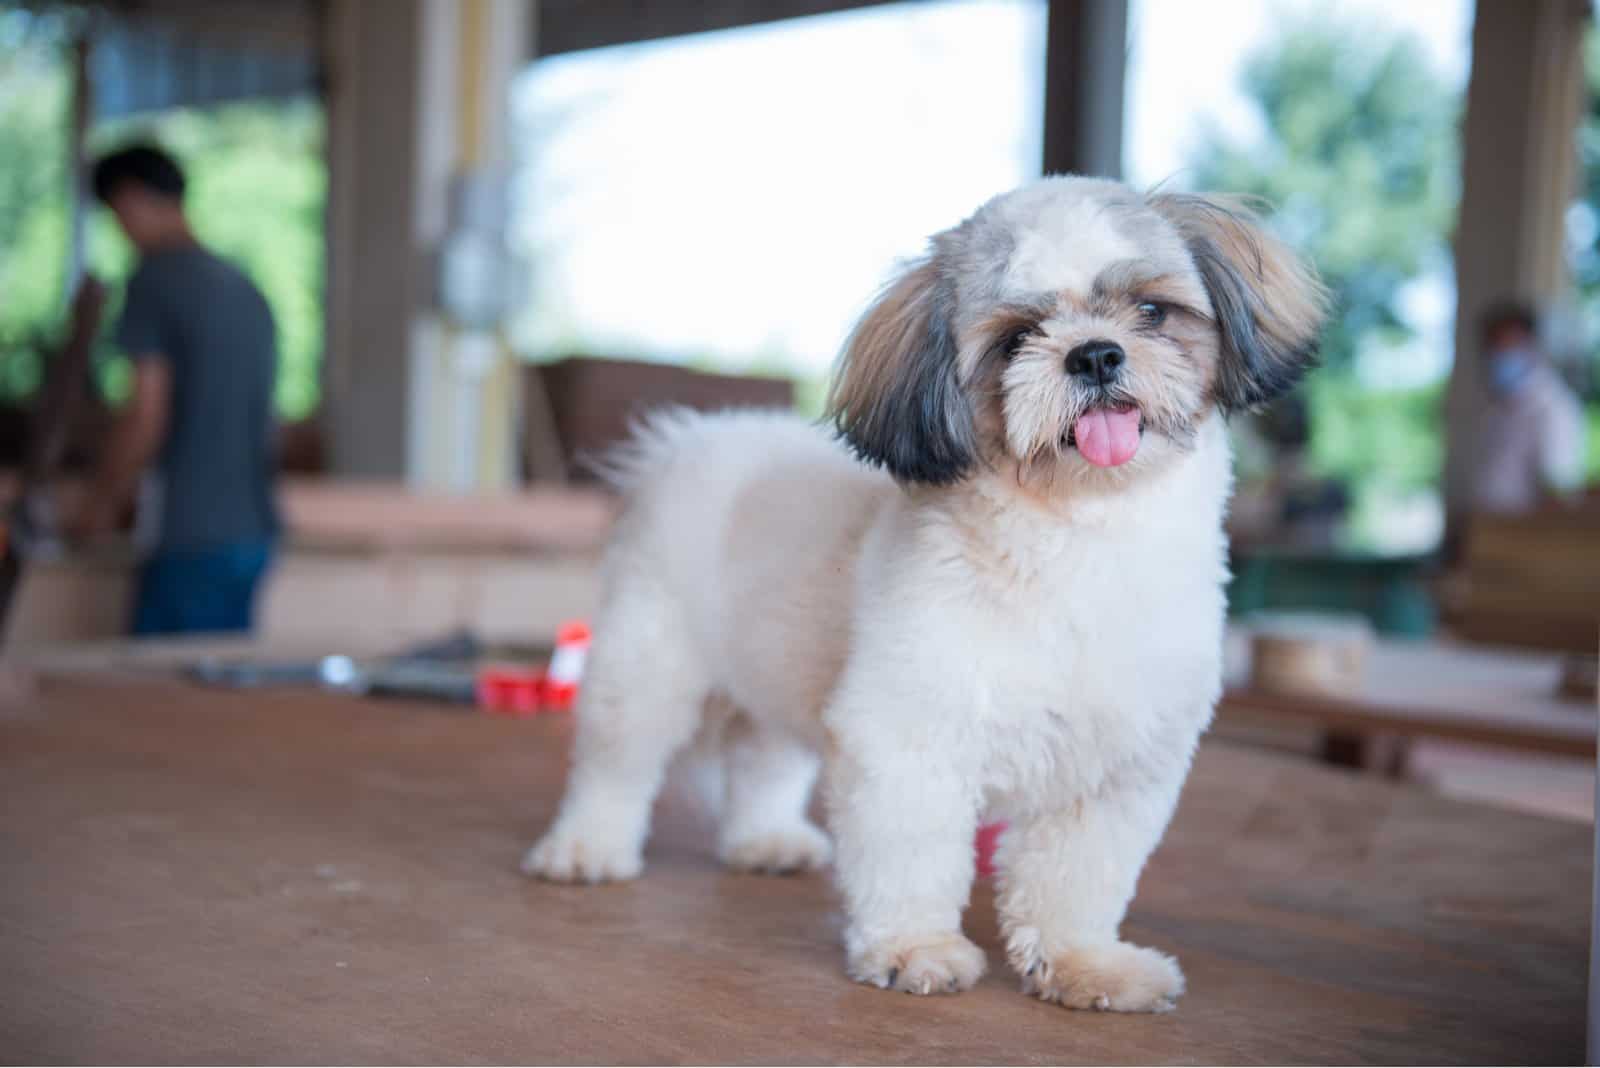 Shih Tzu stands on a wooden surface and looks at the camera